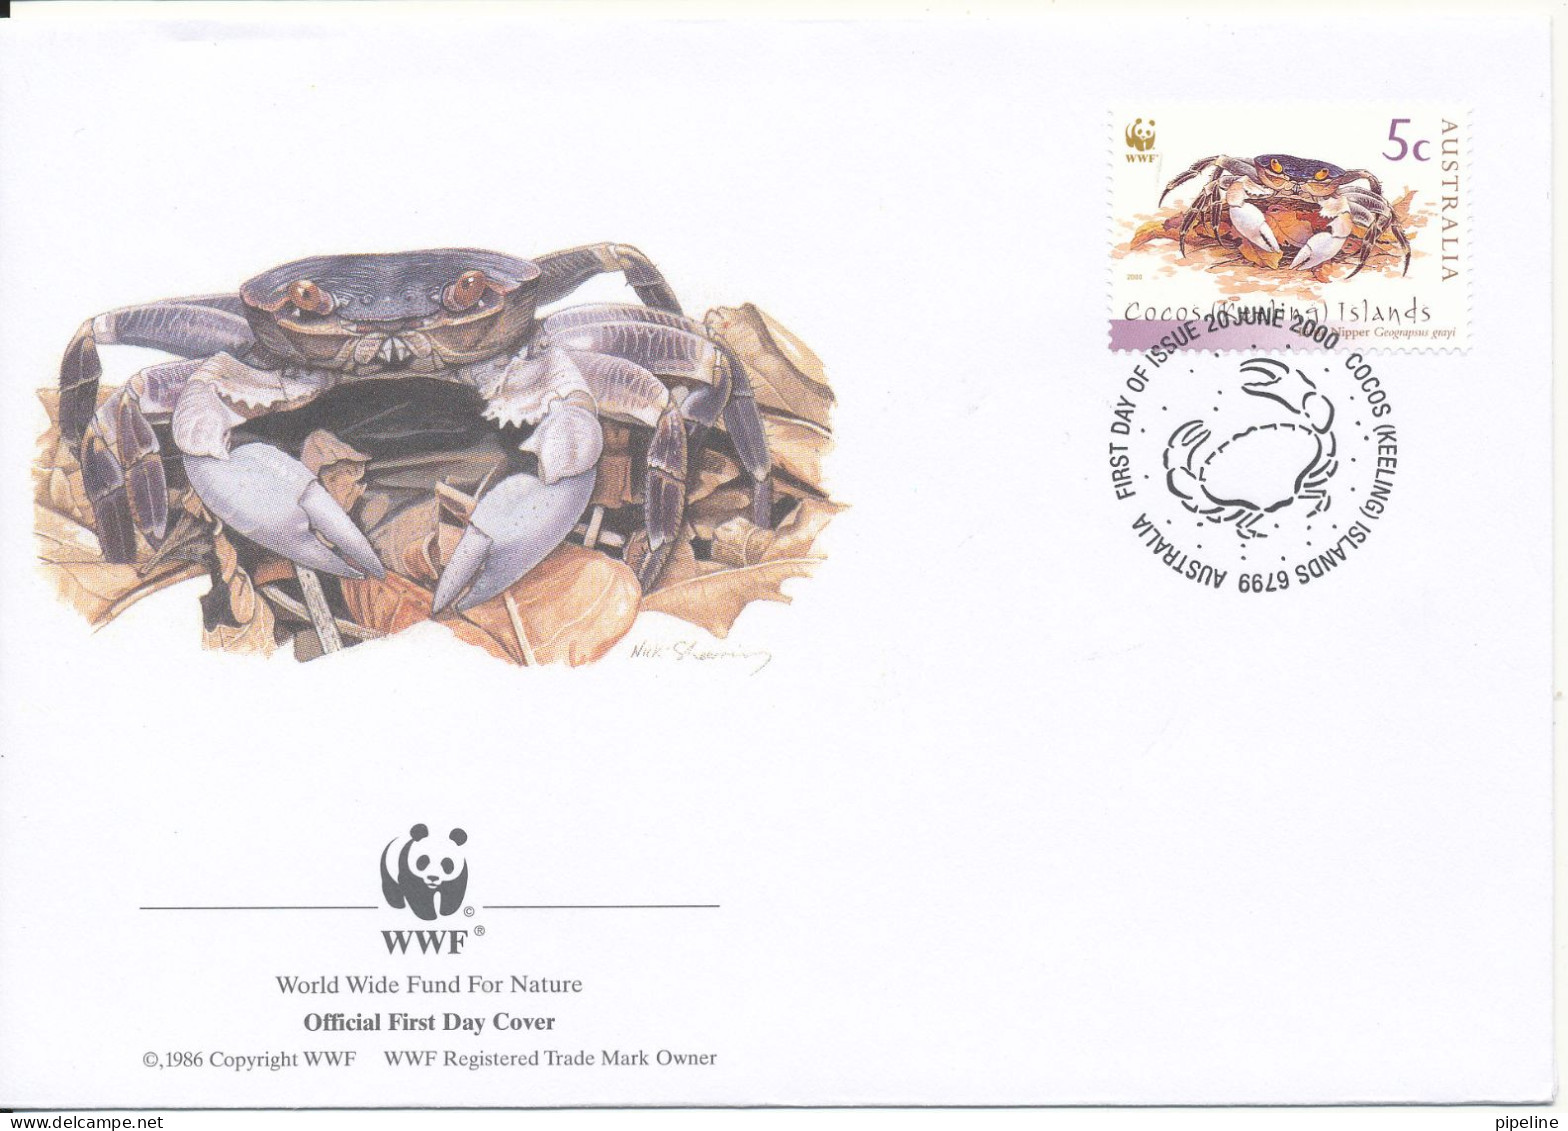 Australia (Cocos Keeling Islands) FDC WWF Cover 20-6-2000 With Crab And Panda On The Stamp - FDC